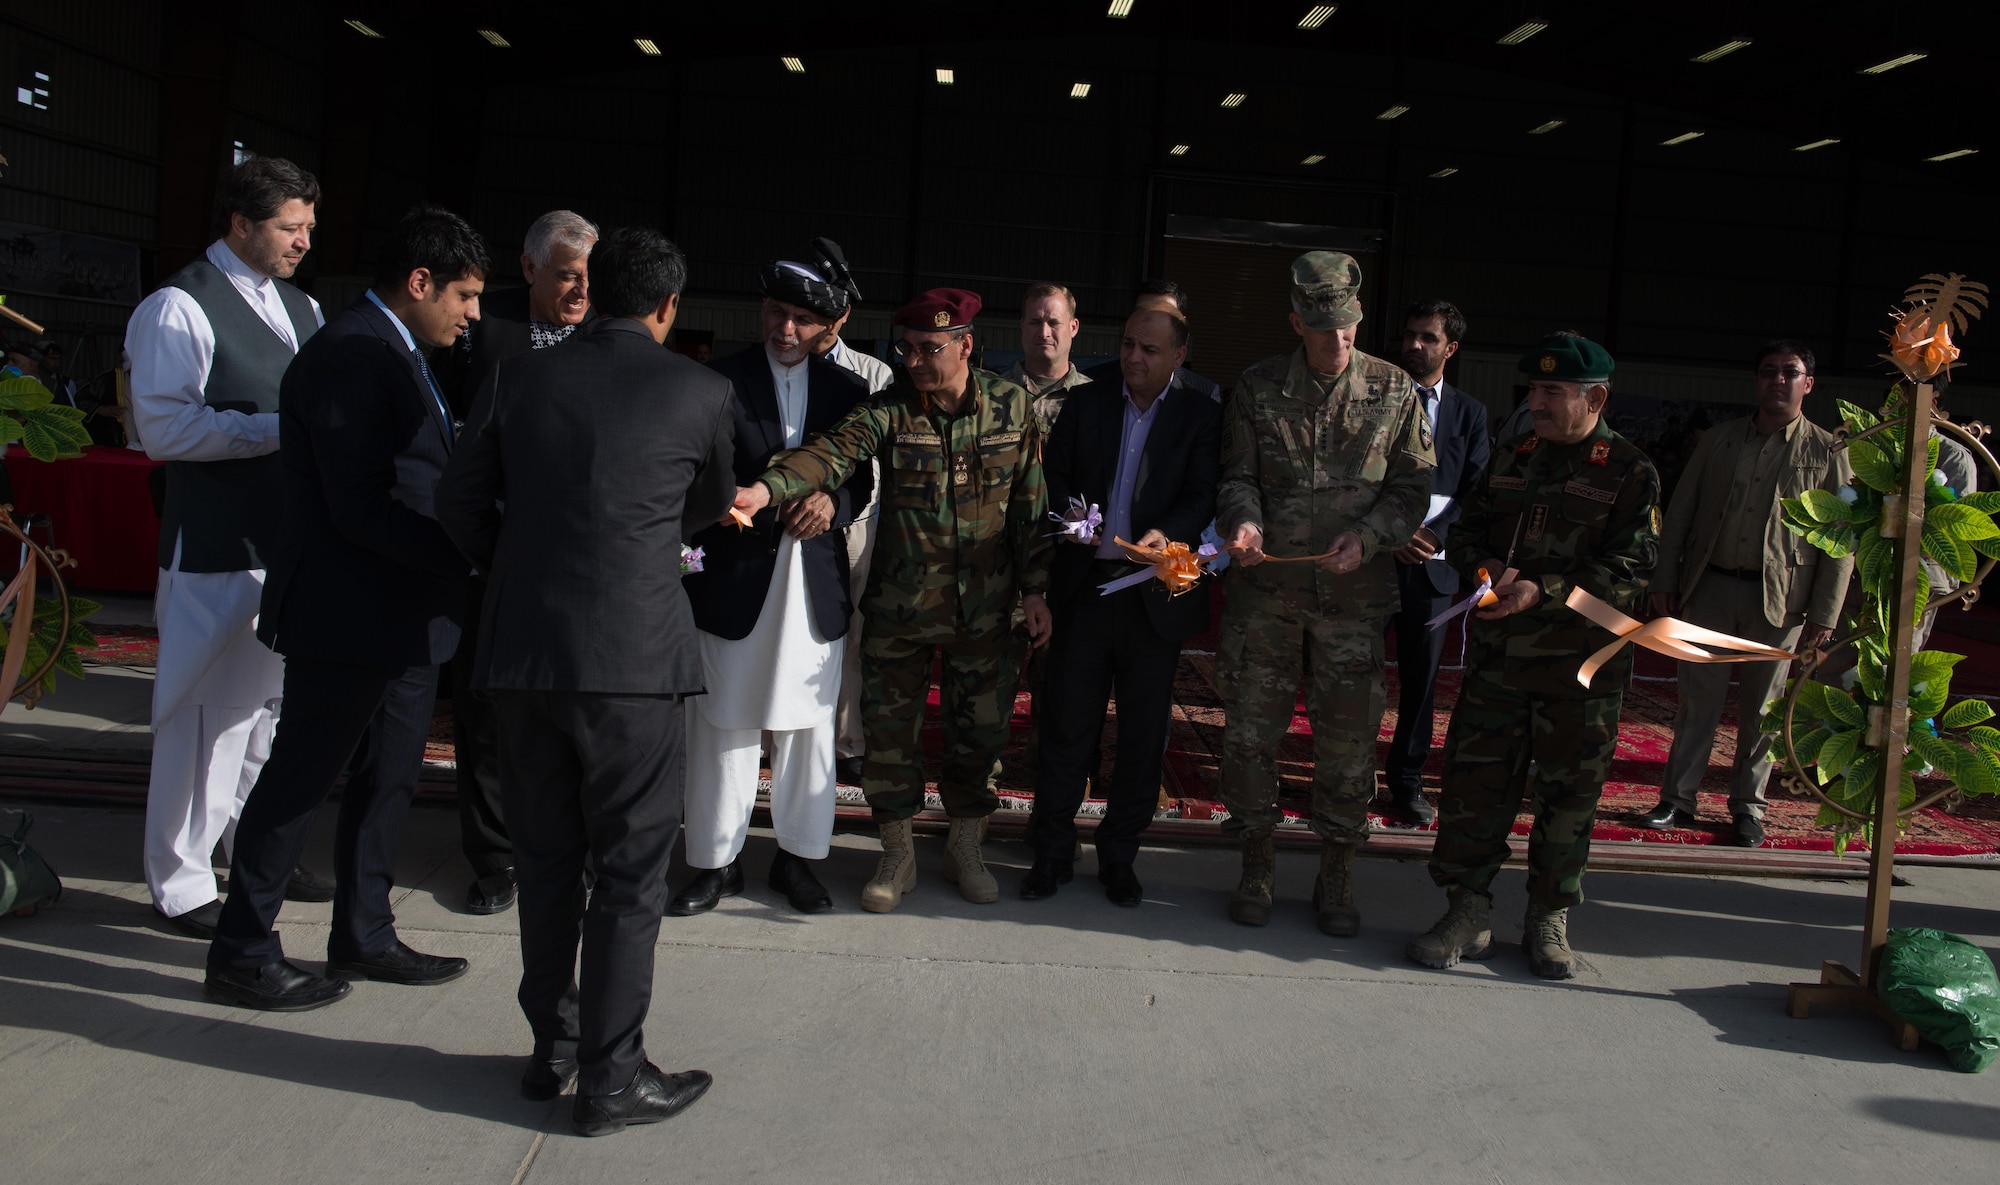 Senior Afghan government officials and coalition defense leaders share in a ribbon cutting symbolizing the transfer of ownership of the first UH-60 Black Hawk helicopter to the Afghan Air Force Oct. 7, 2017, at Kandahar Airfield, Afghanistan. The UH-60 has been selected to enhance the AAF helicopter fleet and augment the capabilities currently provided by the Mi-17 legacy platform. (U.S. Air Force photo by Staff Sgt. Alexander W. Riedel)